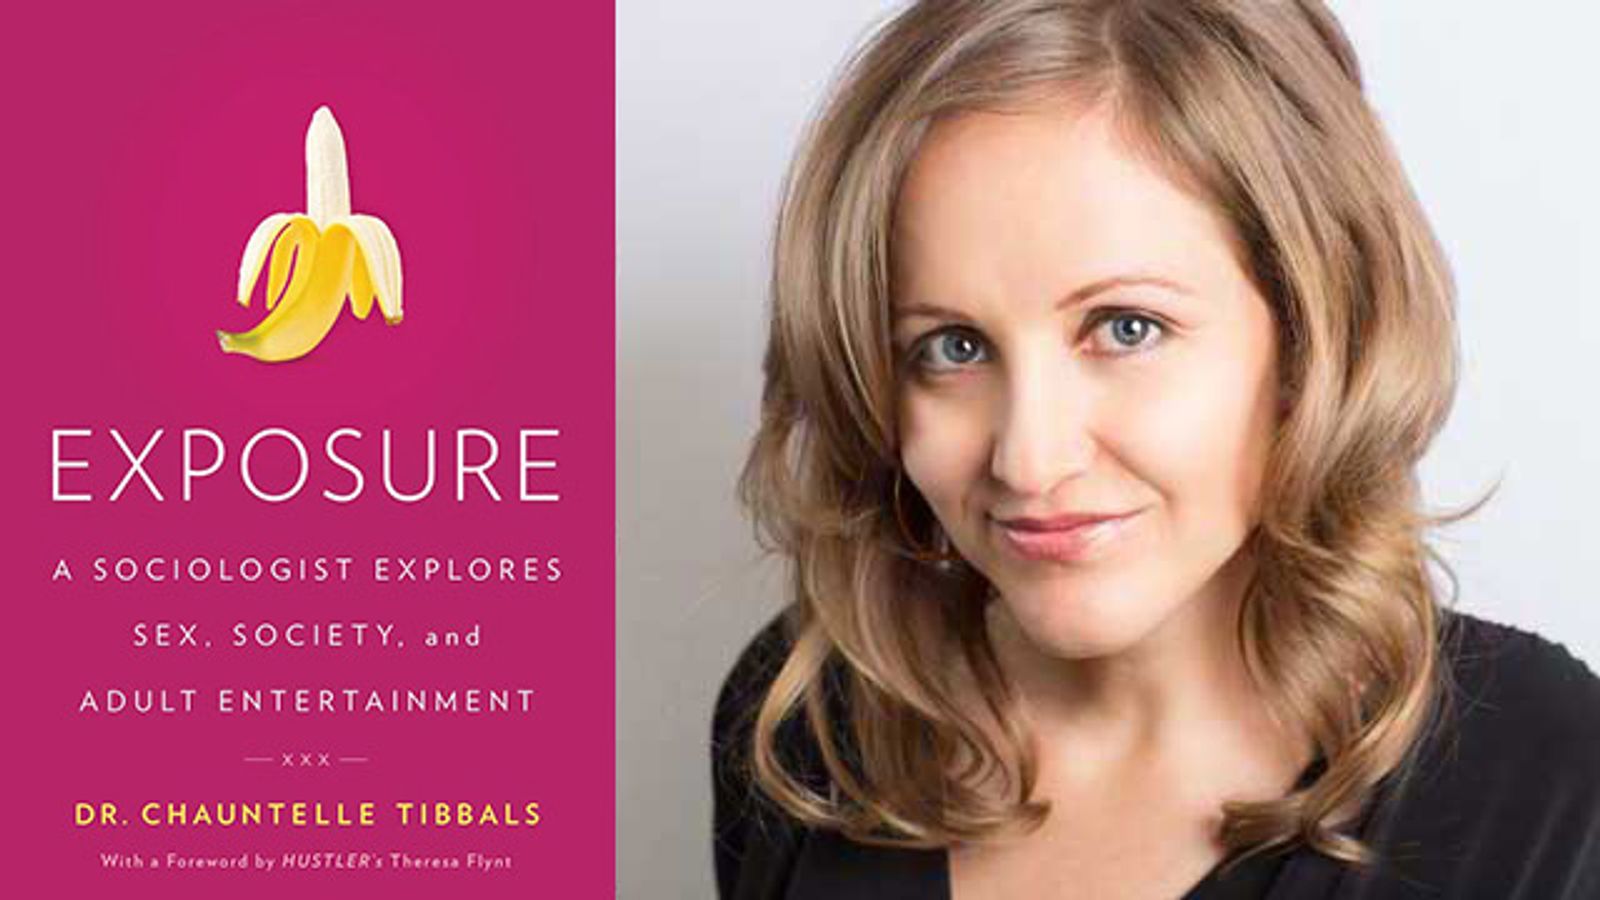 Dr. Chauntelle Tibbals’ New Book 'Exposure' Arrives in Stores Today